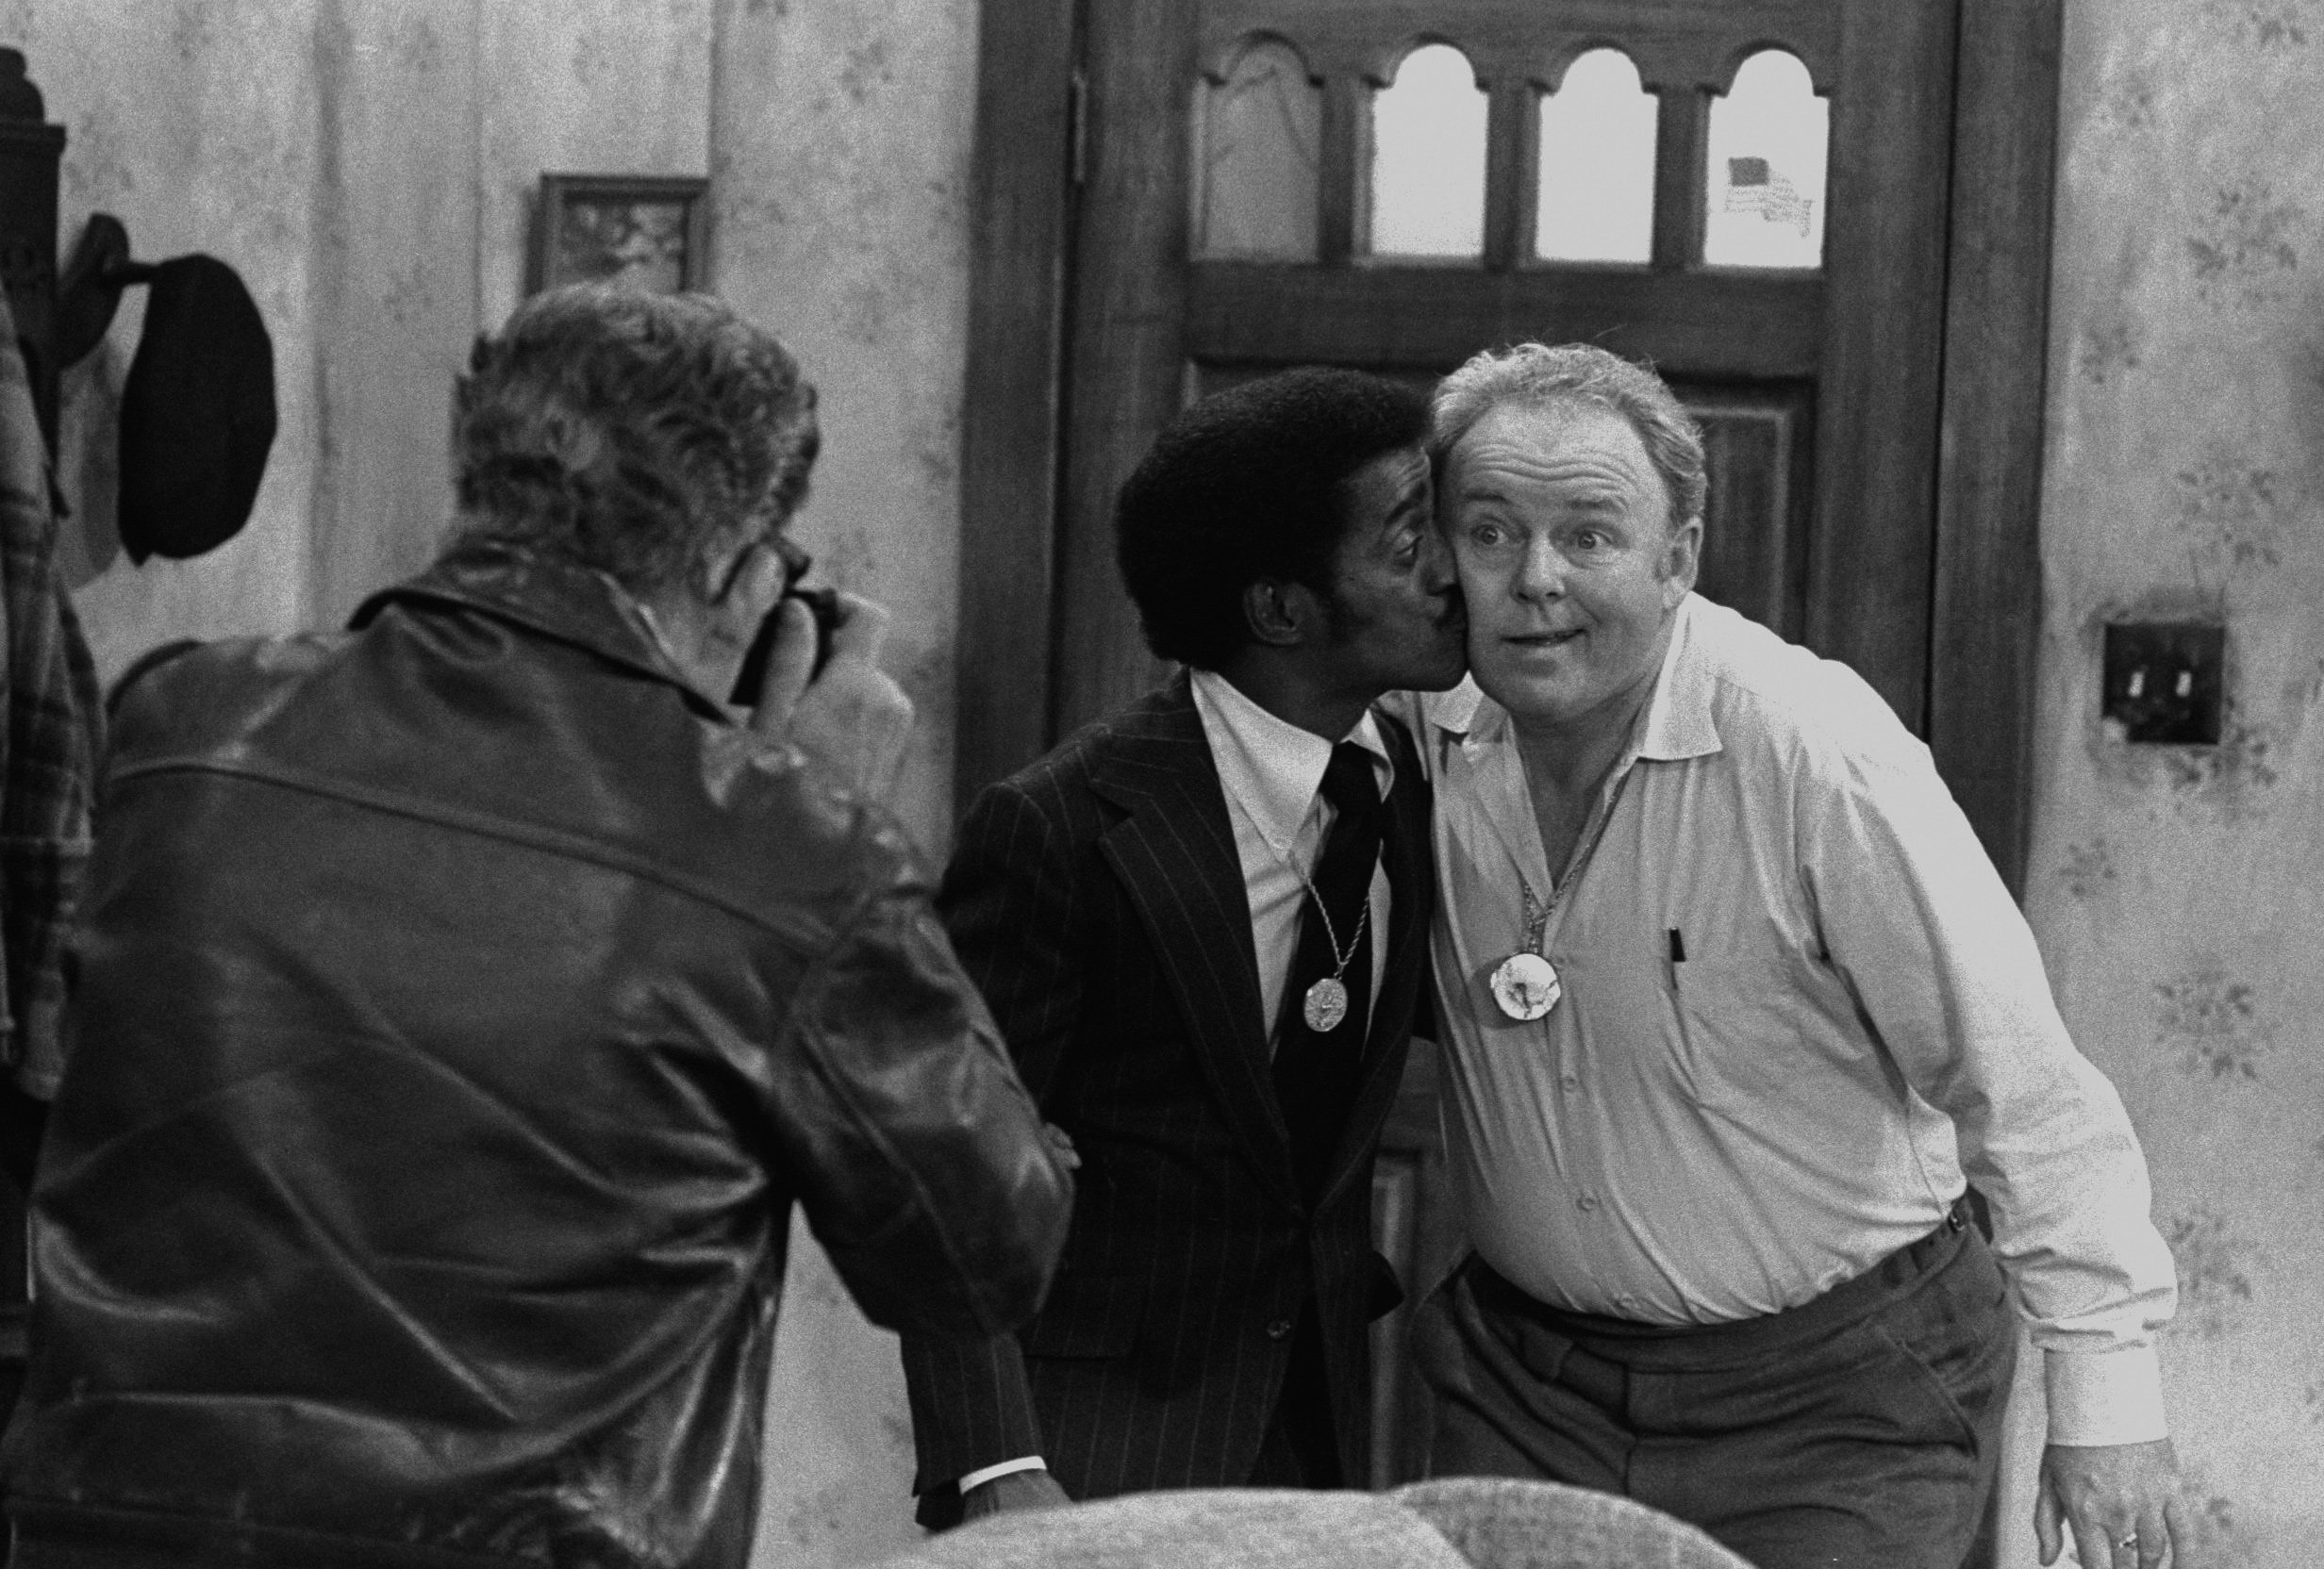 Actor Billy Halop (with camera), entertainer Sammy Davis Jr., and actor Carroll O'Connor in a scene from 'All in the Family'